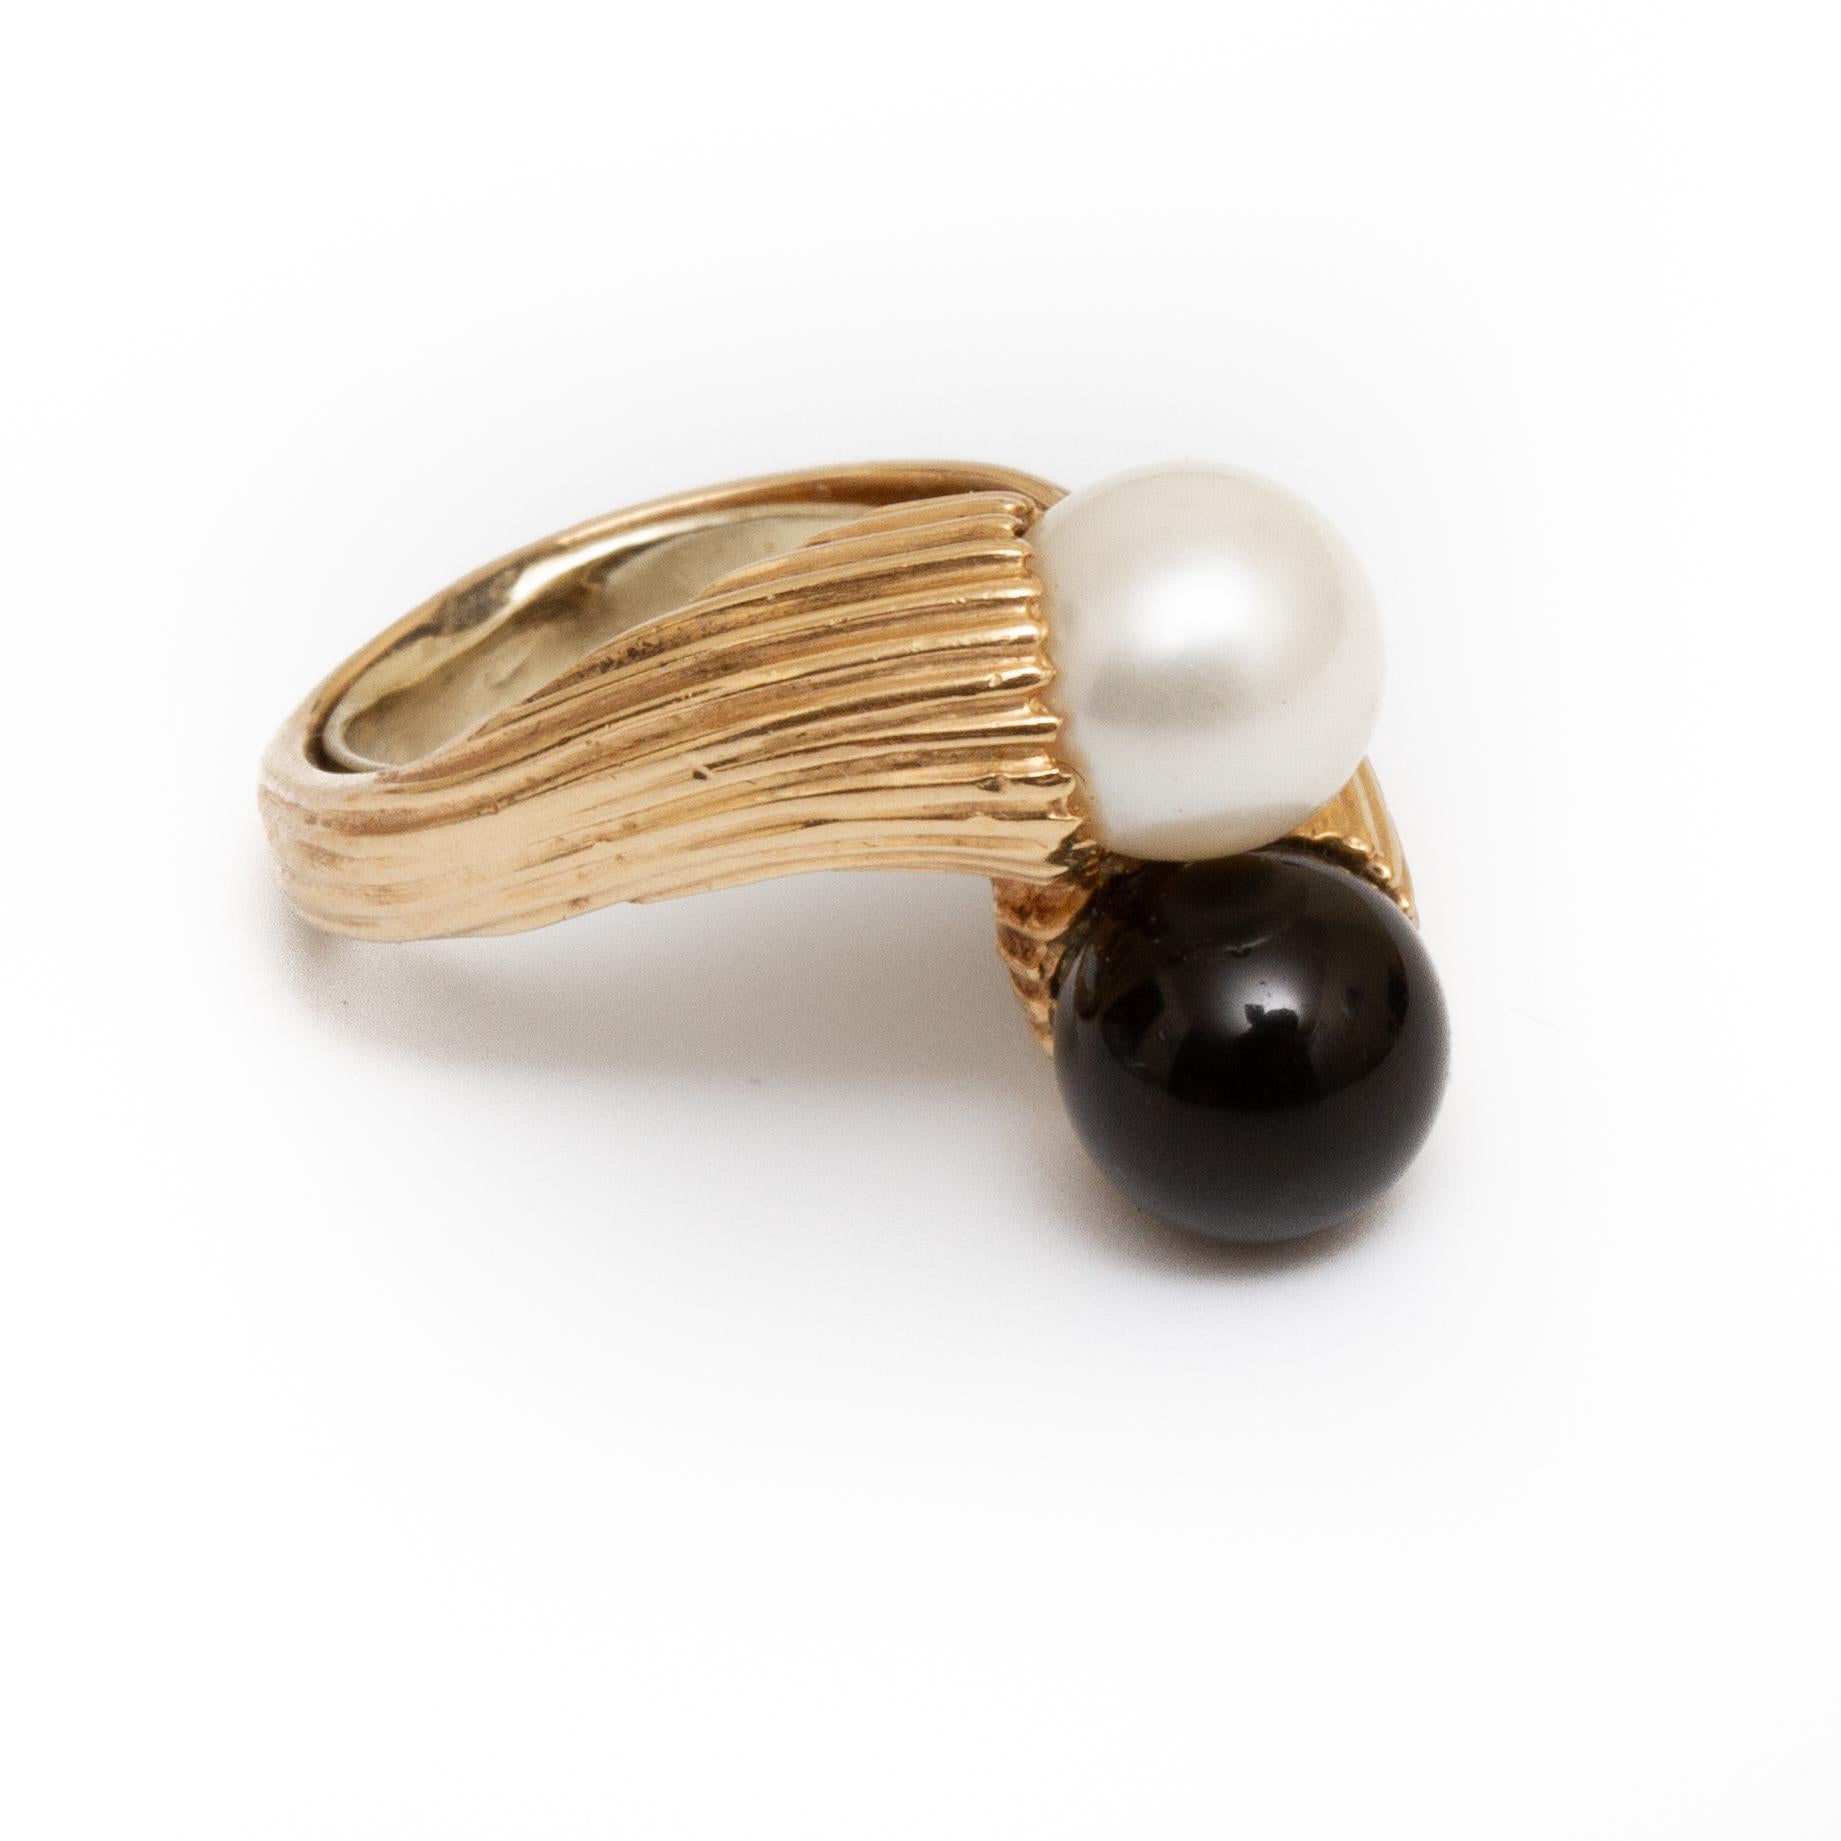 18k gold bypass ring with pearl and black onyx. Size 6.5 approx From the Broussard estate noted jewelry collection Park Avenue New York